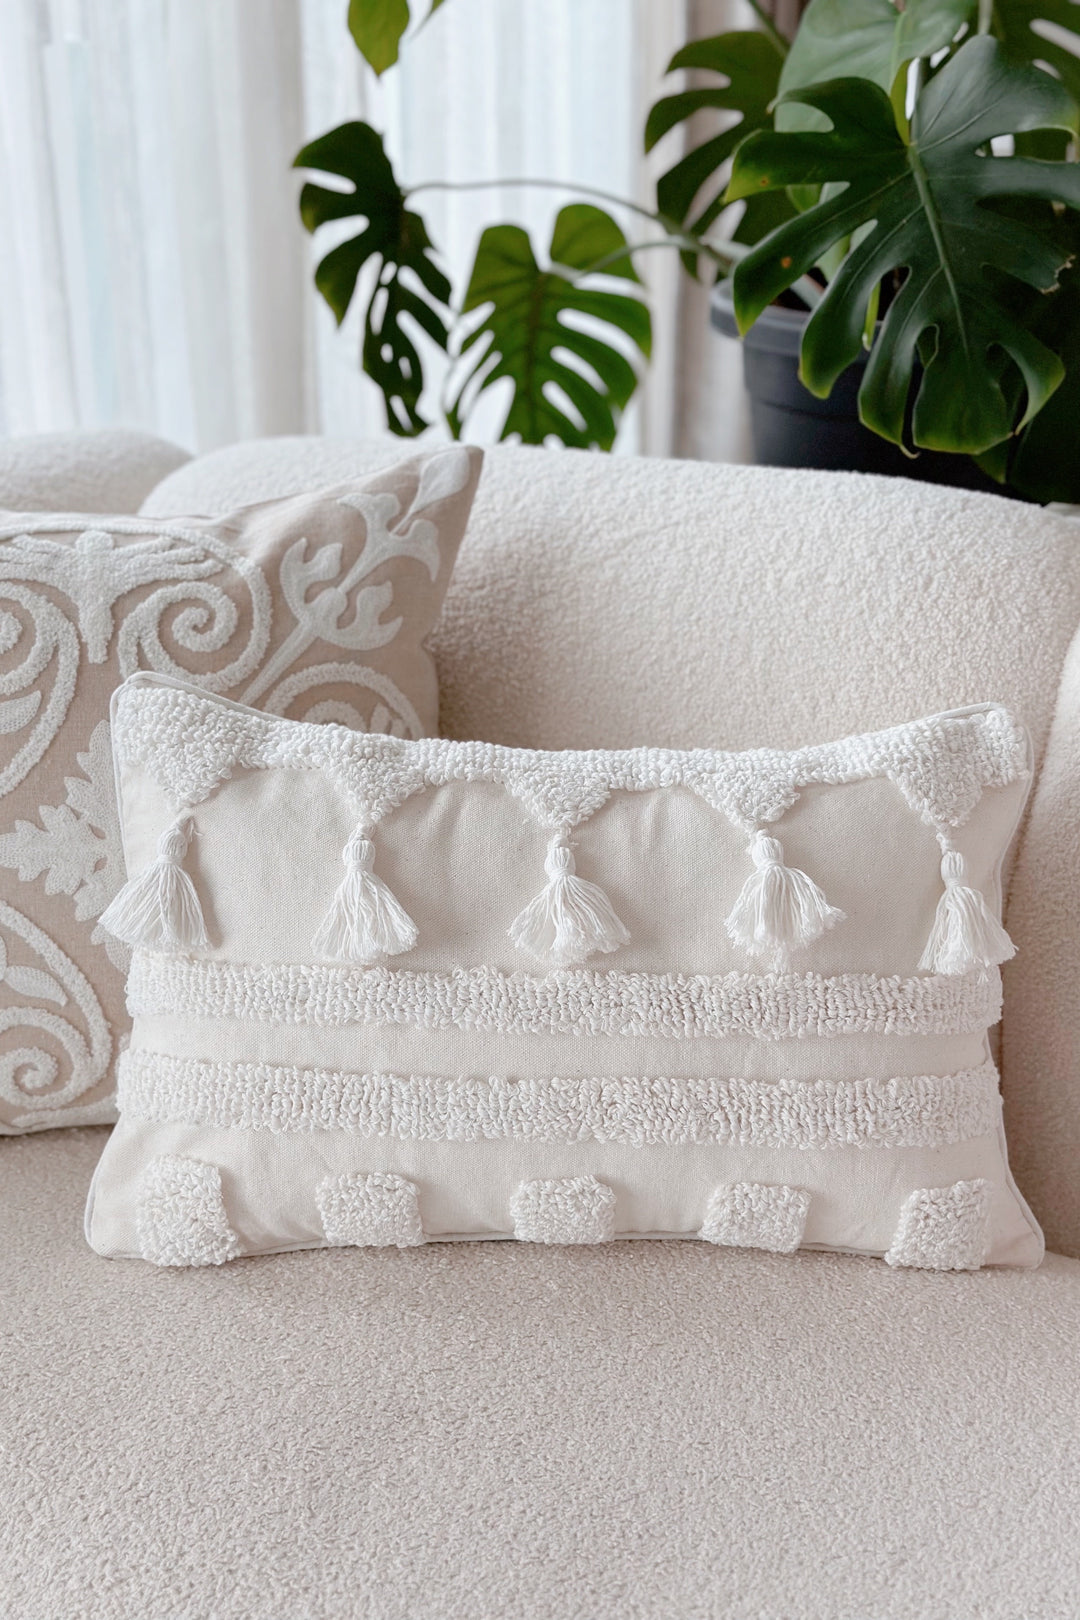 3D White Pattern and Tassels Waist Cushion Cover